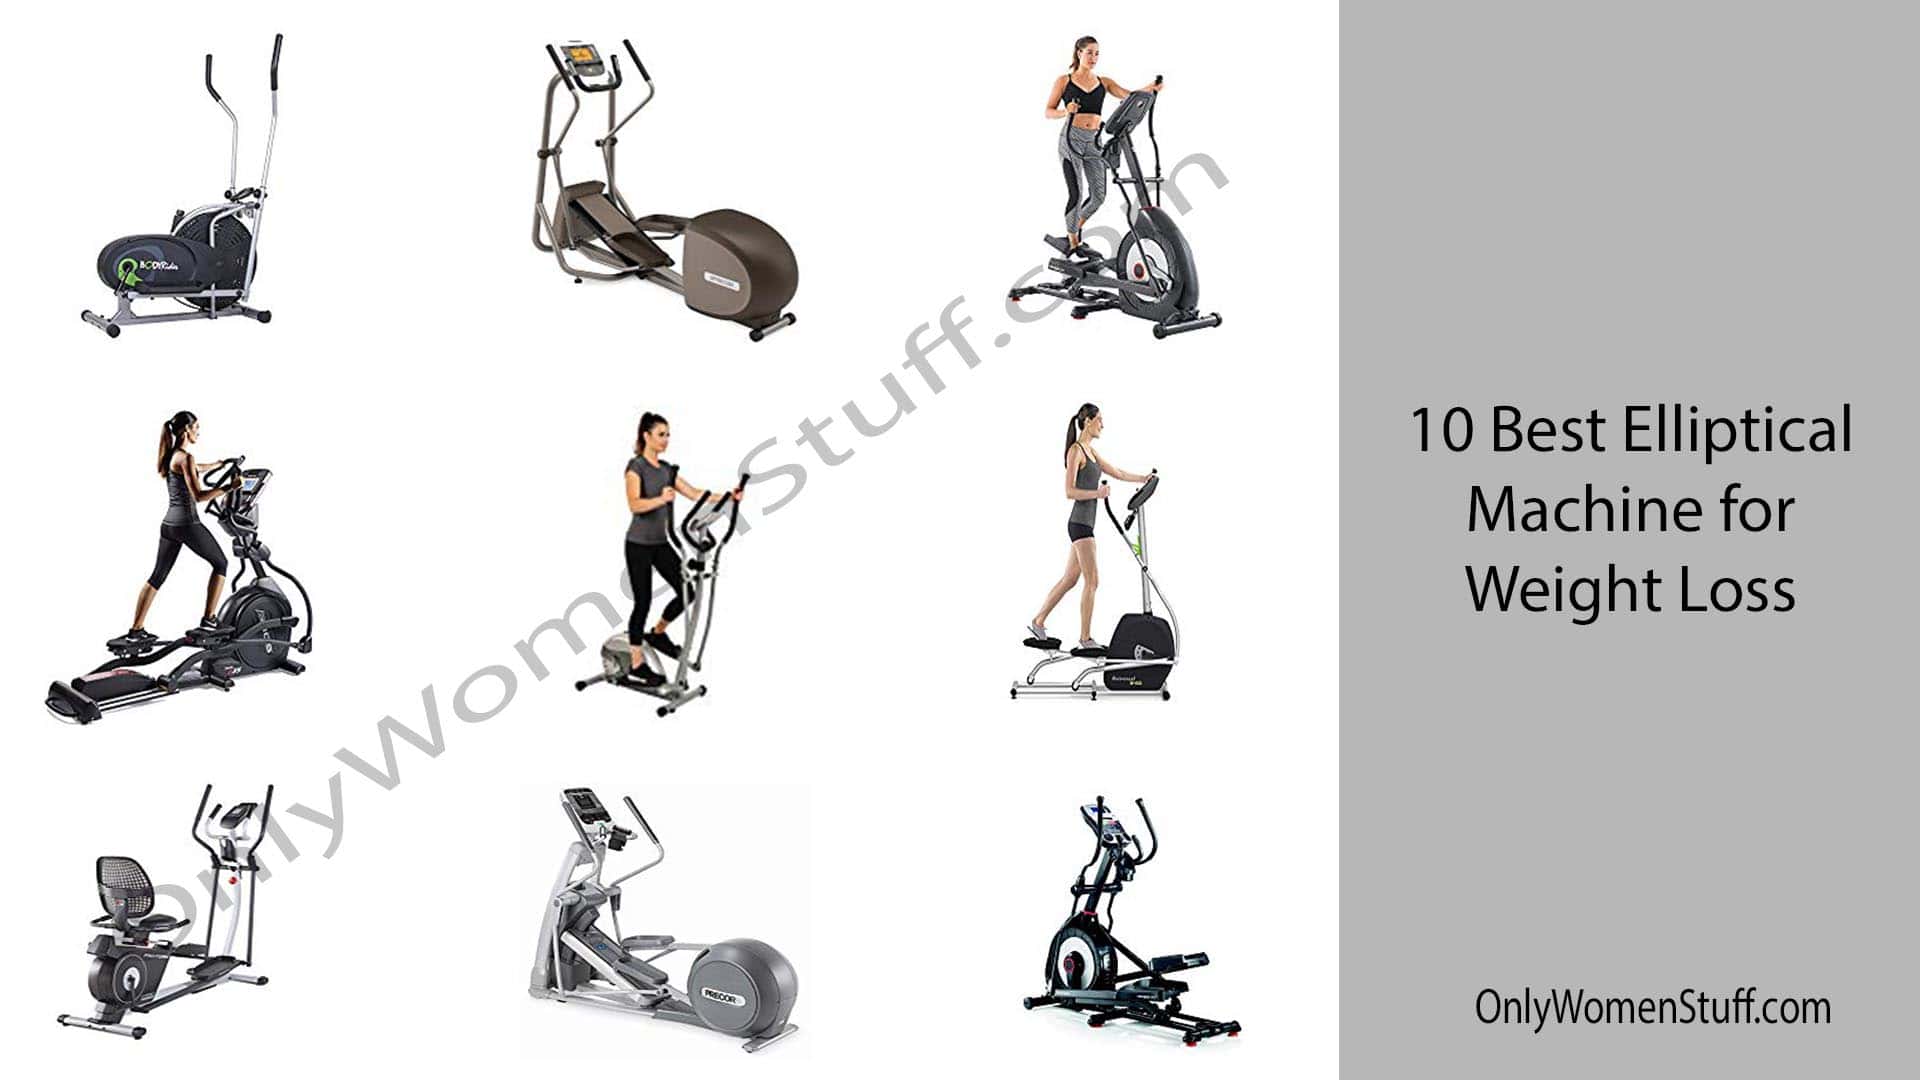 elliptical workouts machine for weight loss elliptical machine weight loss elliptical weight loss results elliptical 30 minutes a day weight loss how long should you run on an elliptical to lose weight best home elliptical machine